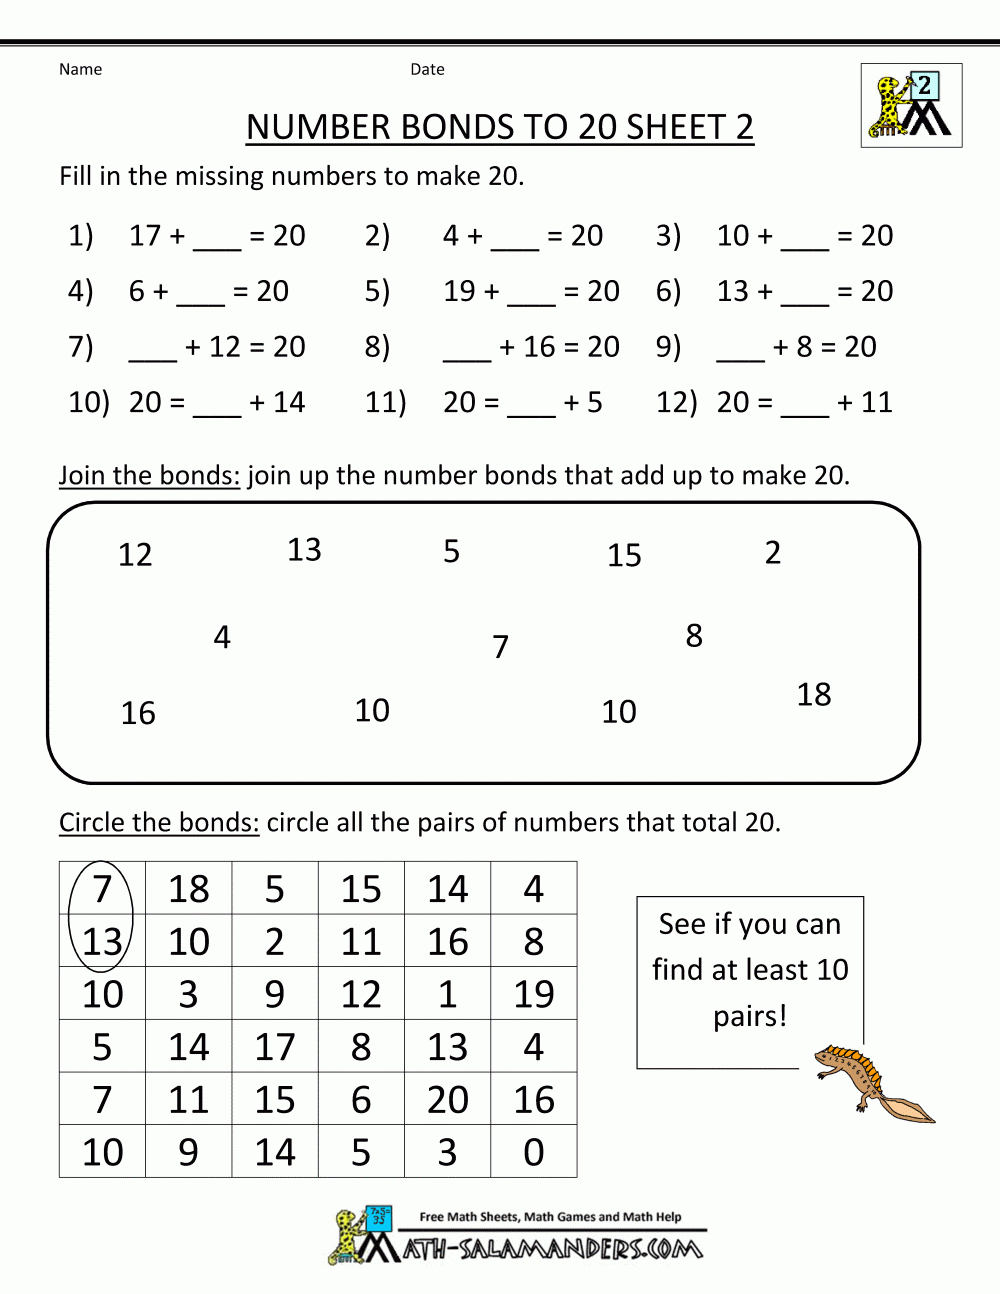 2Nd Grade Math Worksheets Number Bonds To 20 2 | Math Activities - Free Printable Number Bond Template